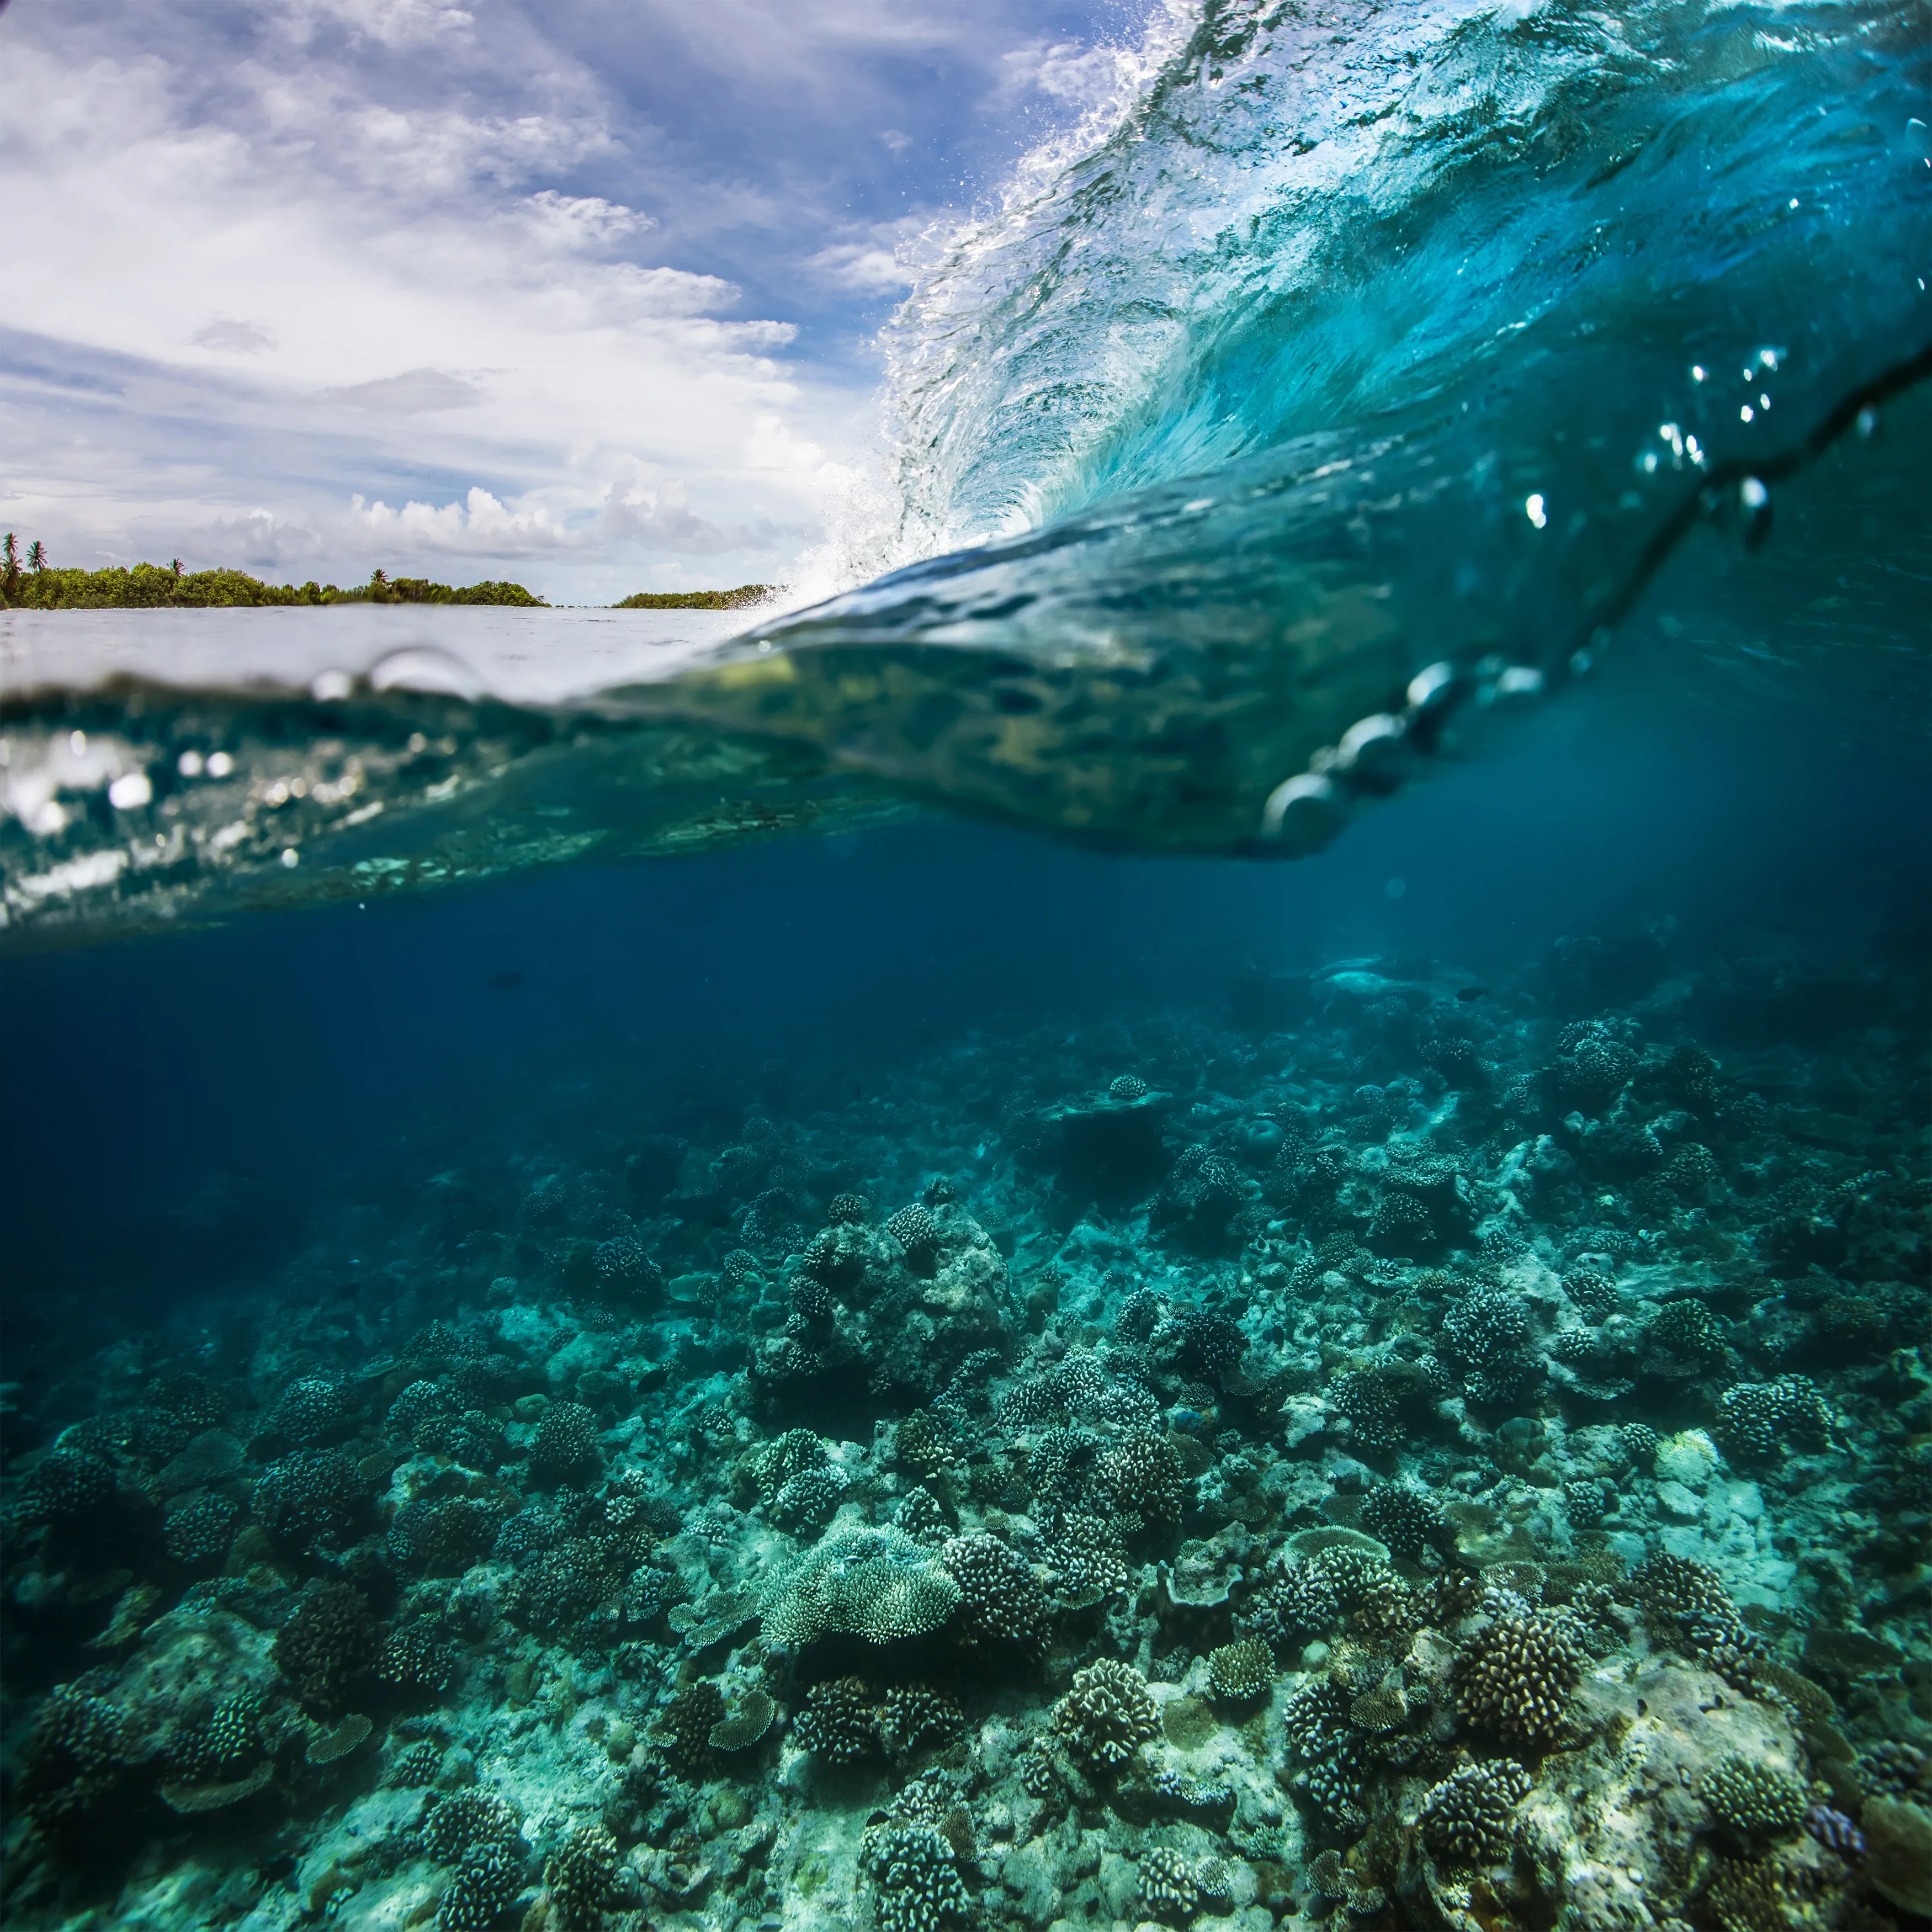 A surfing wave with waterline over tropical coral reef